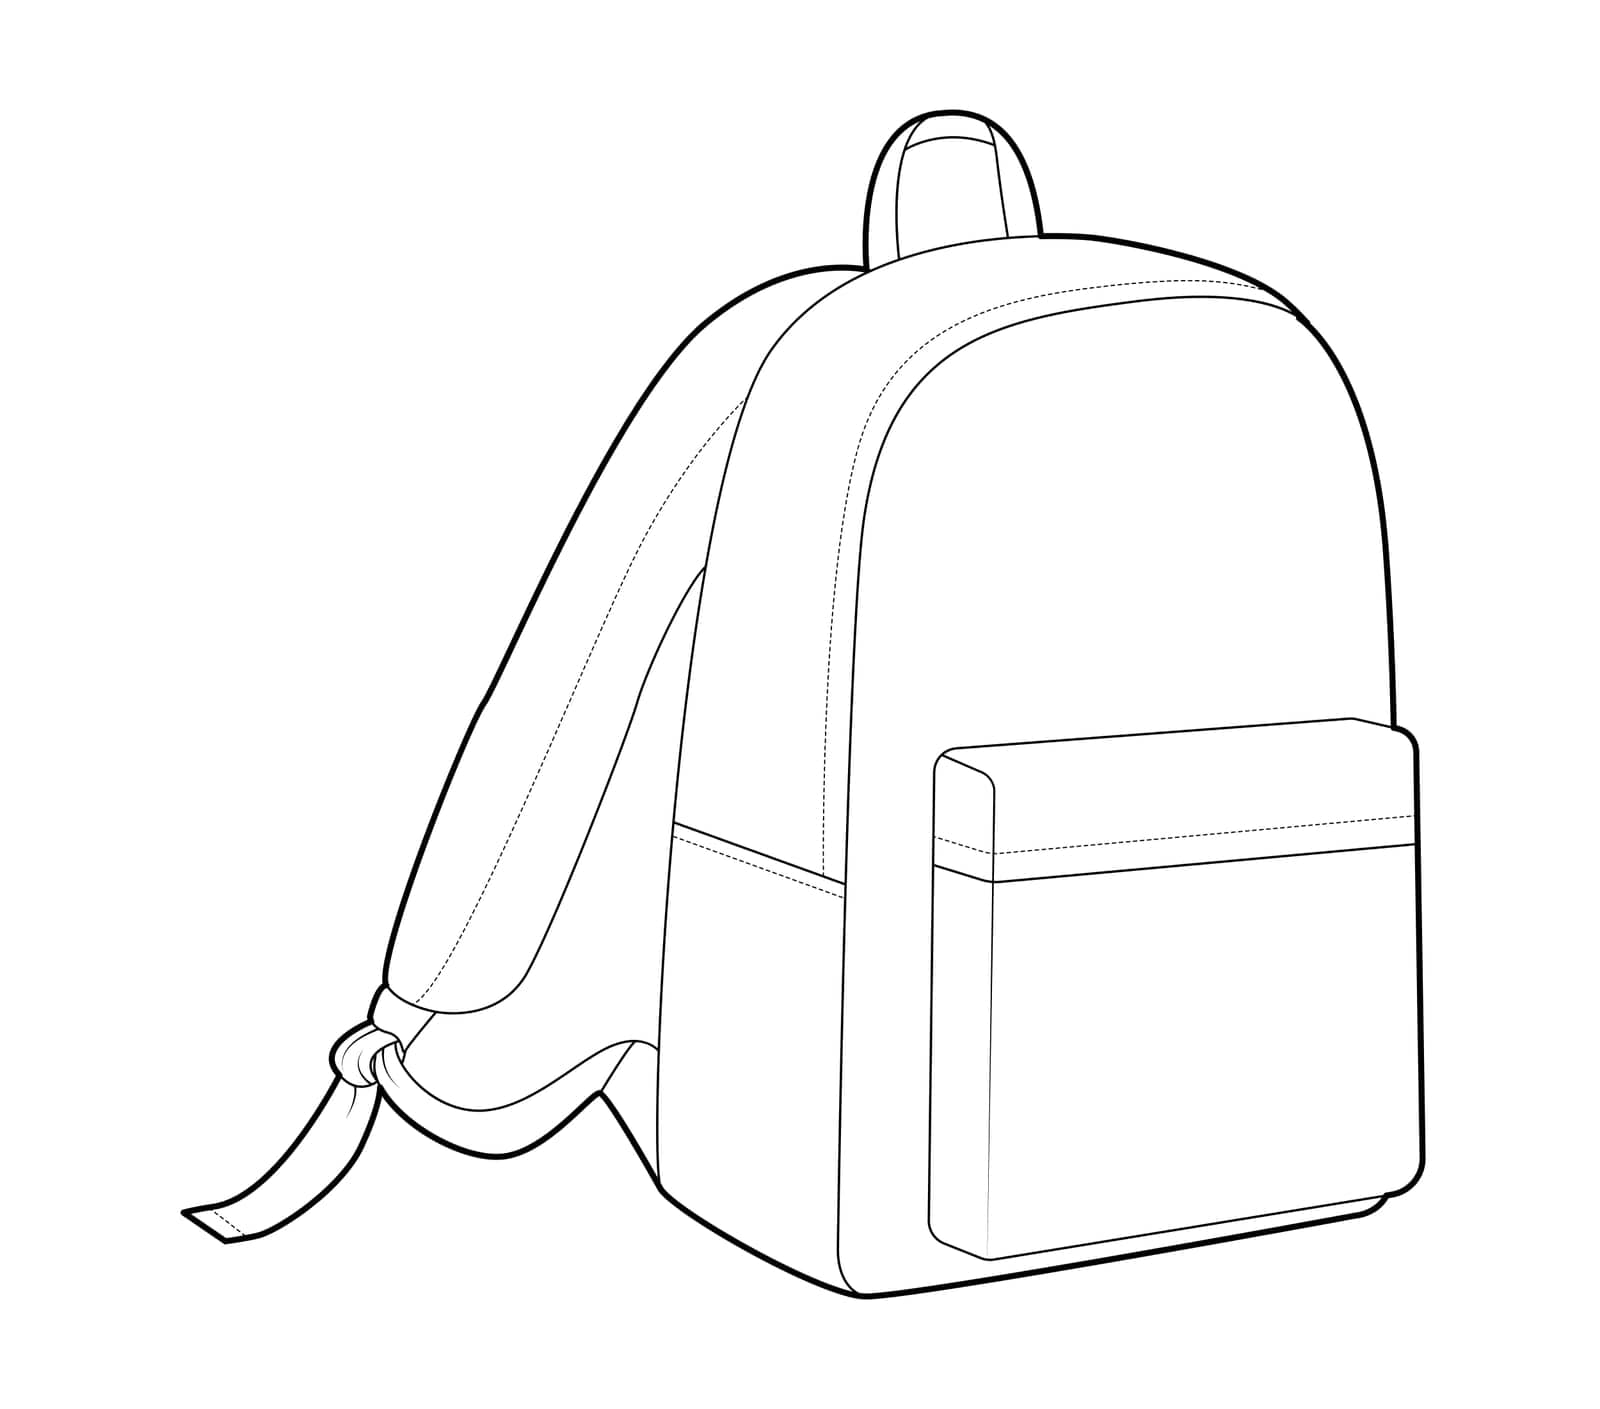 Backpack silhouette bag. Fashion accessory technical illustration. Vector schoolbag 3-4 view for Men, women by Vectoressa